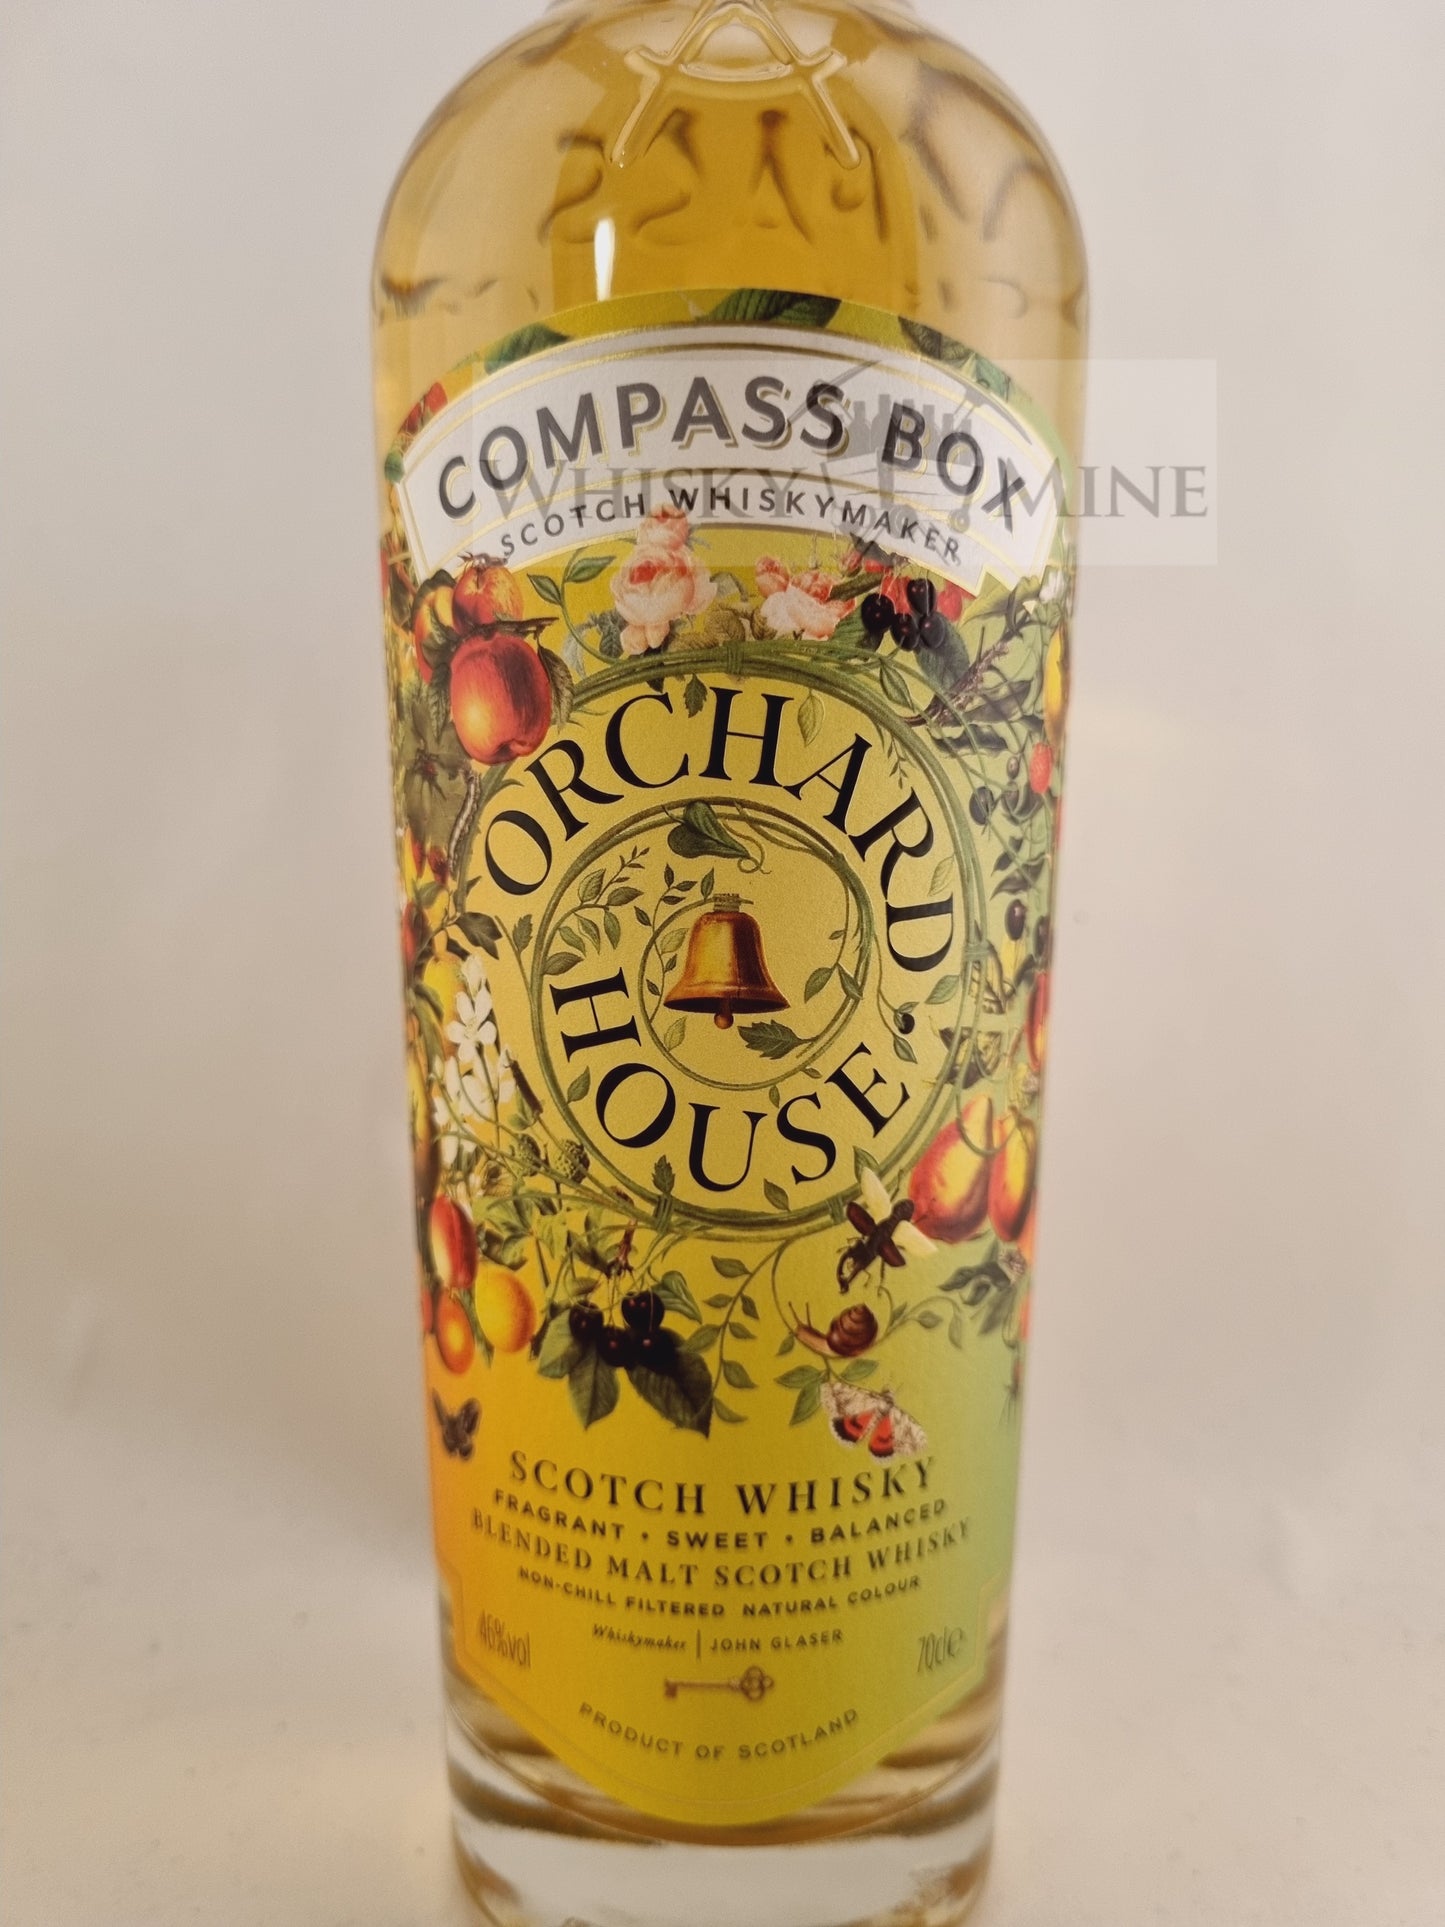 Compass box Orchard House 46% 70cl